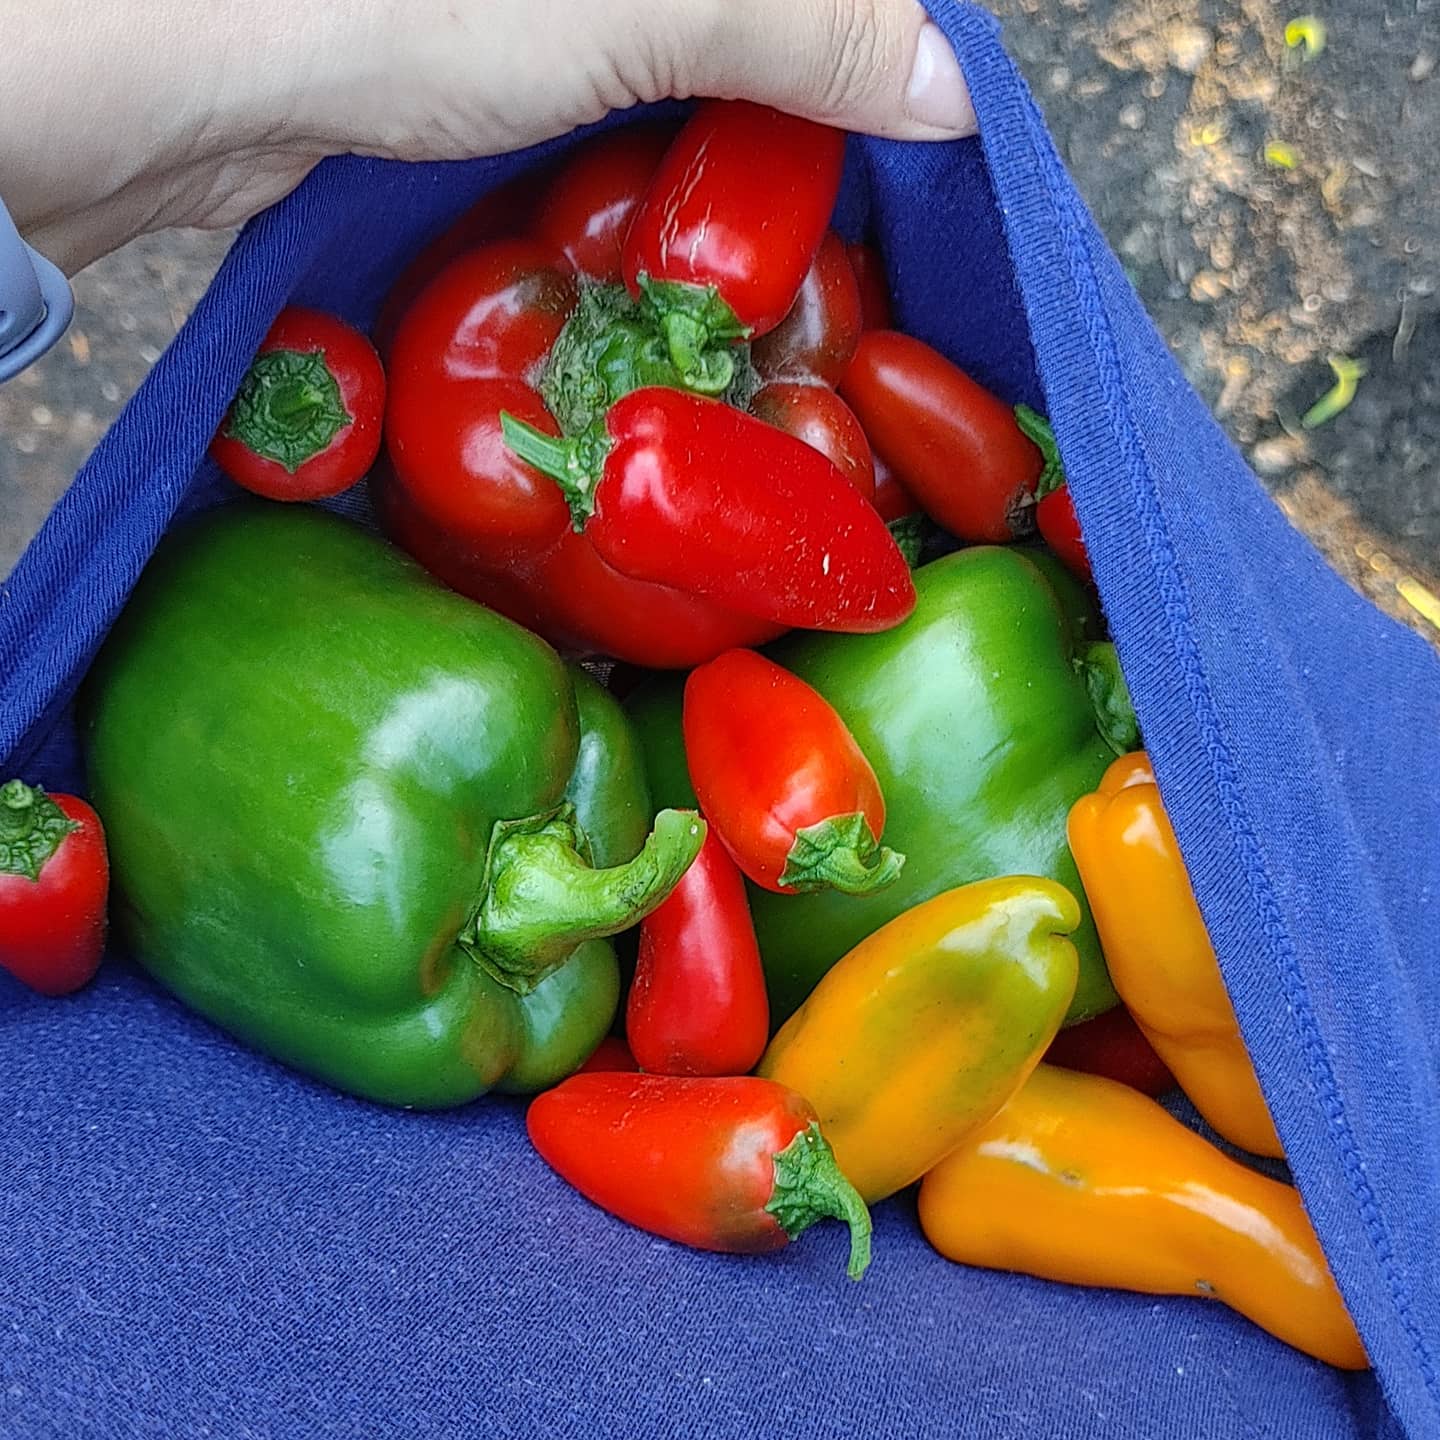 Mid-September and the peppers are thriving!